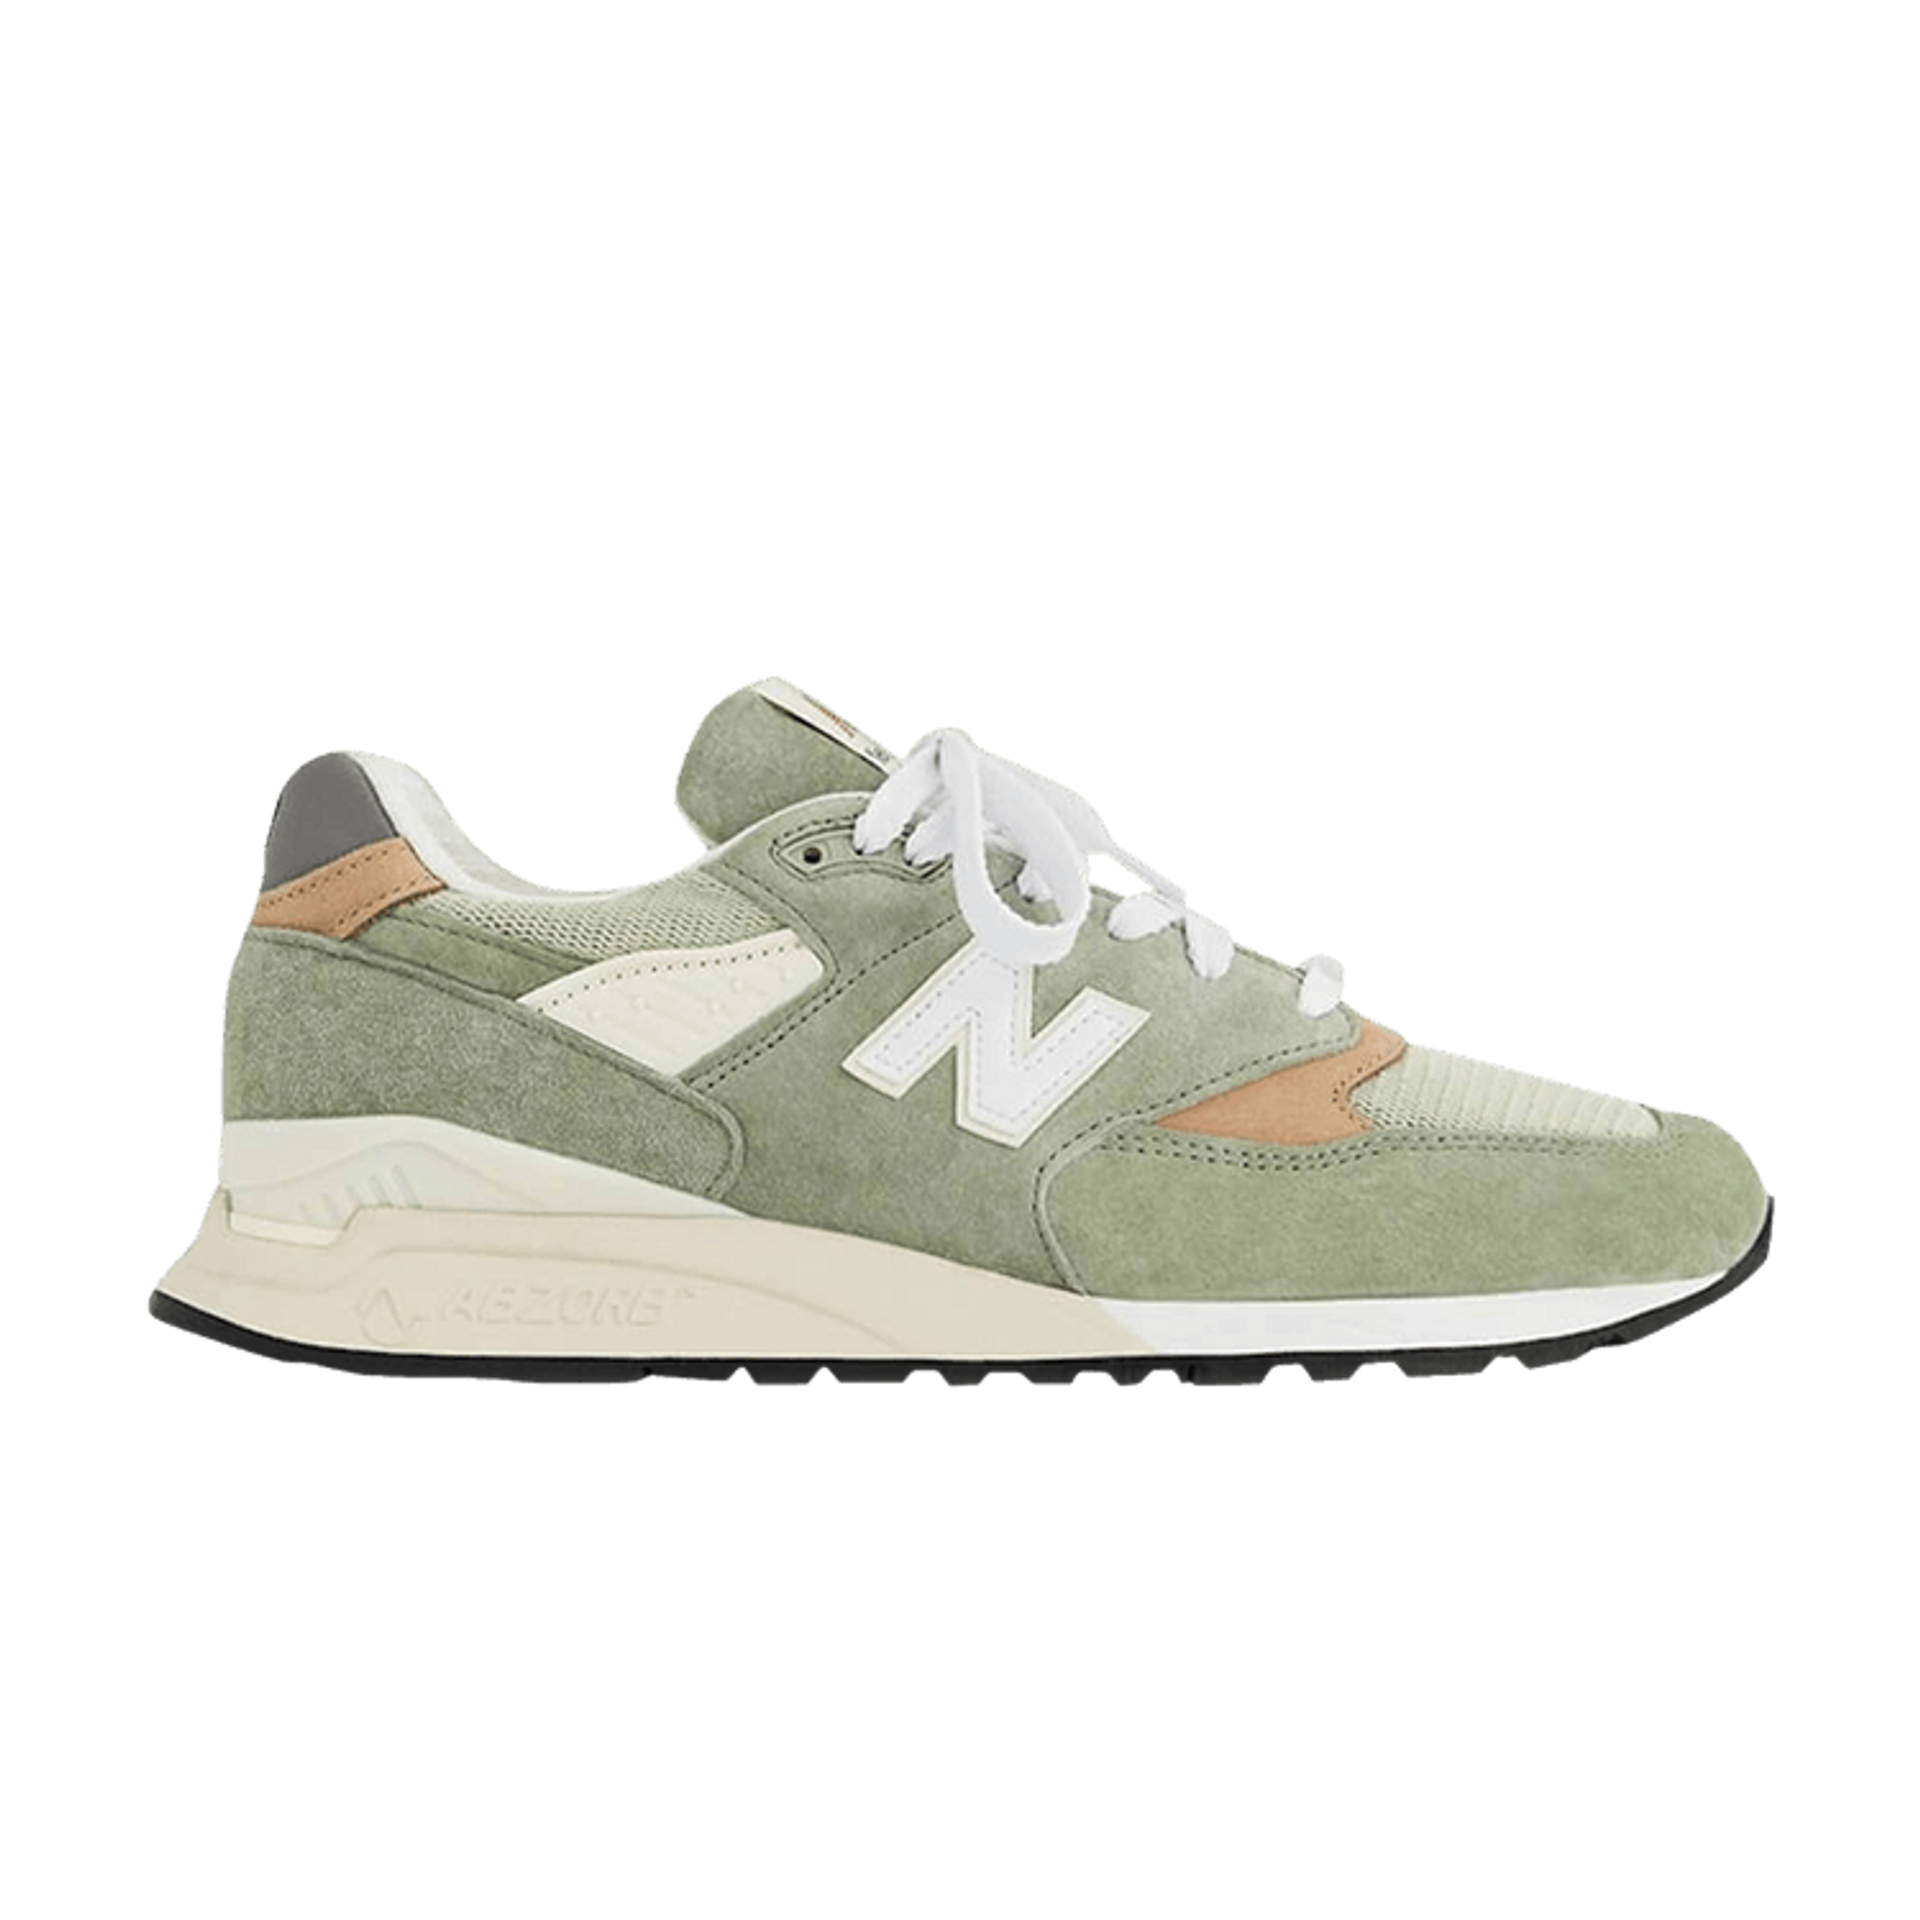 Teddy Santis x New Balance 998 Made in USA 'Olive Incense'